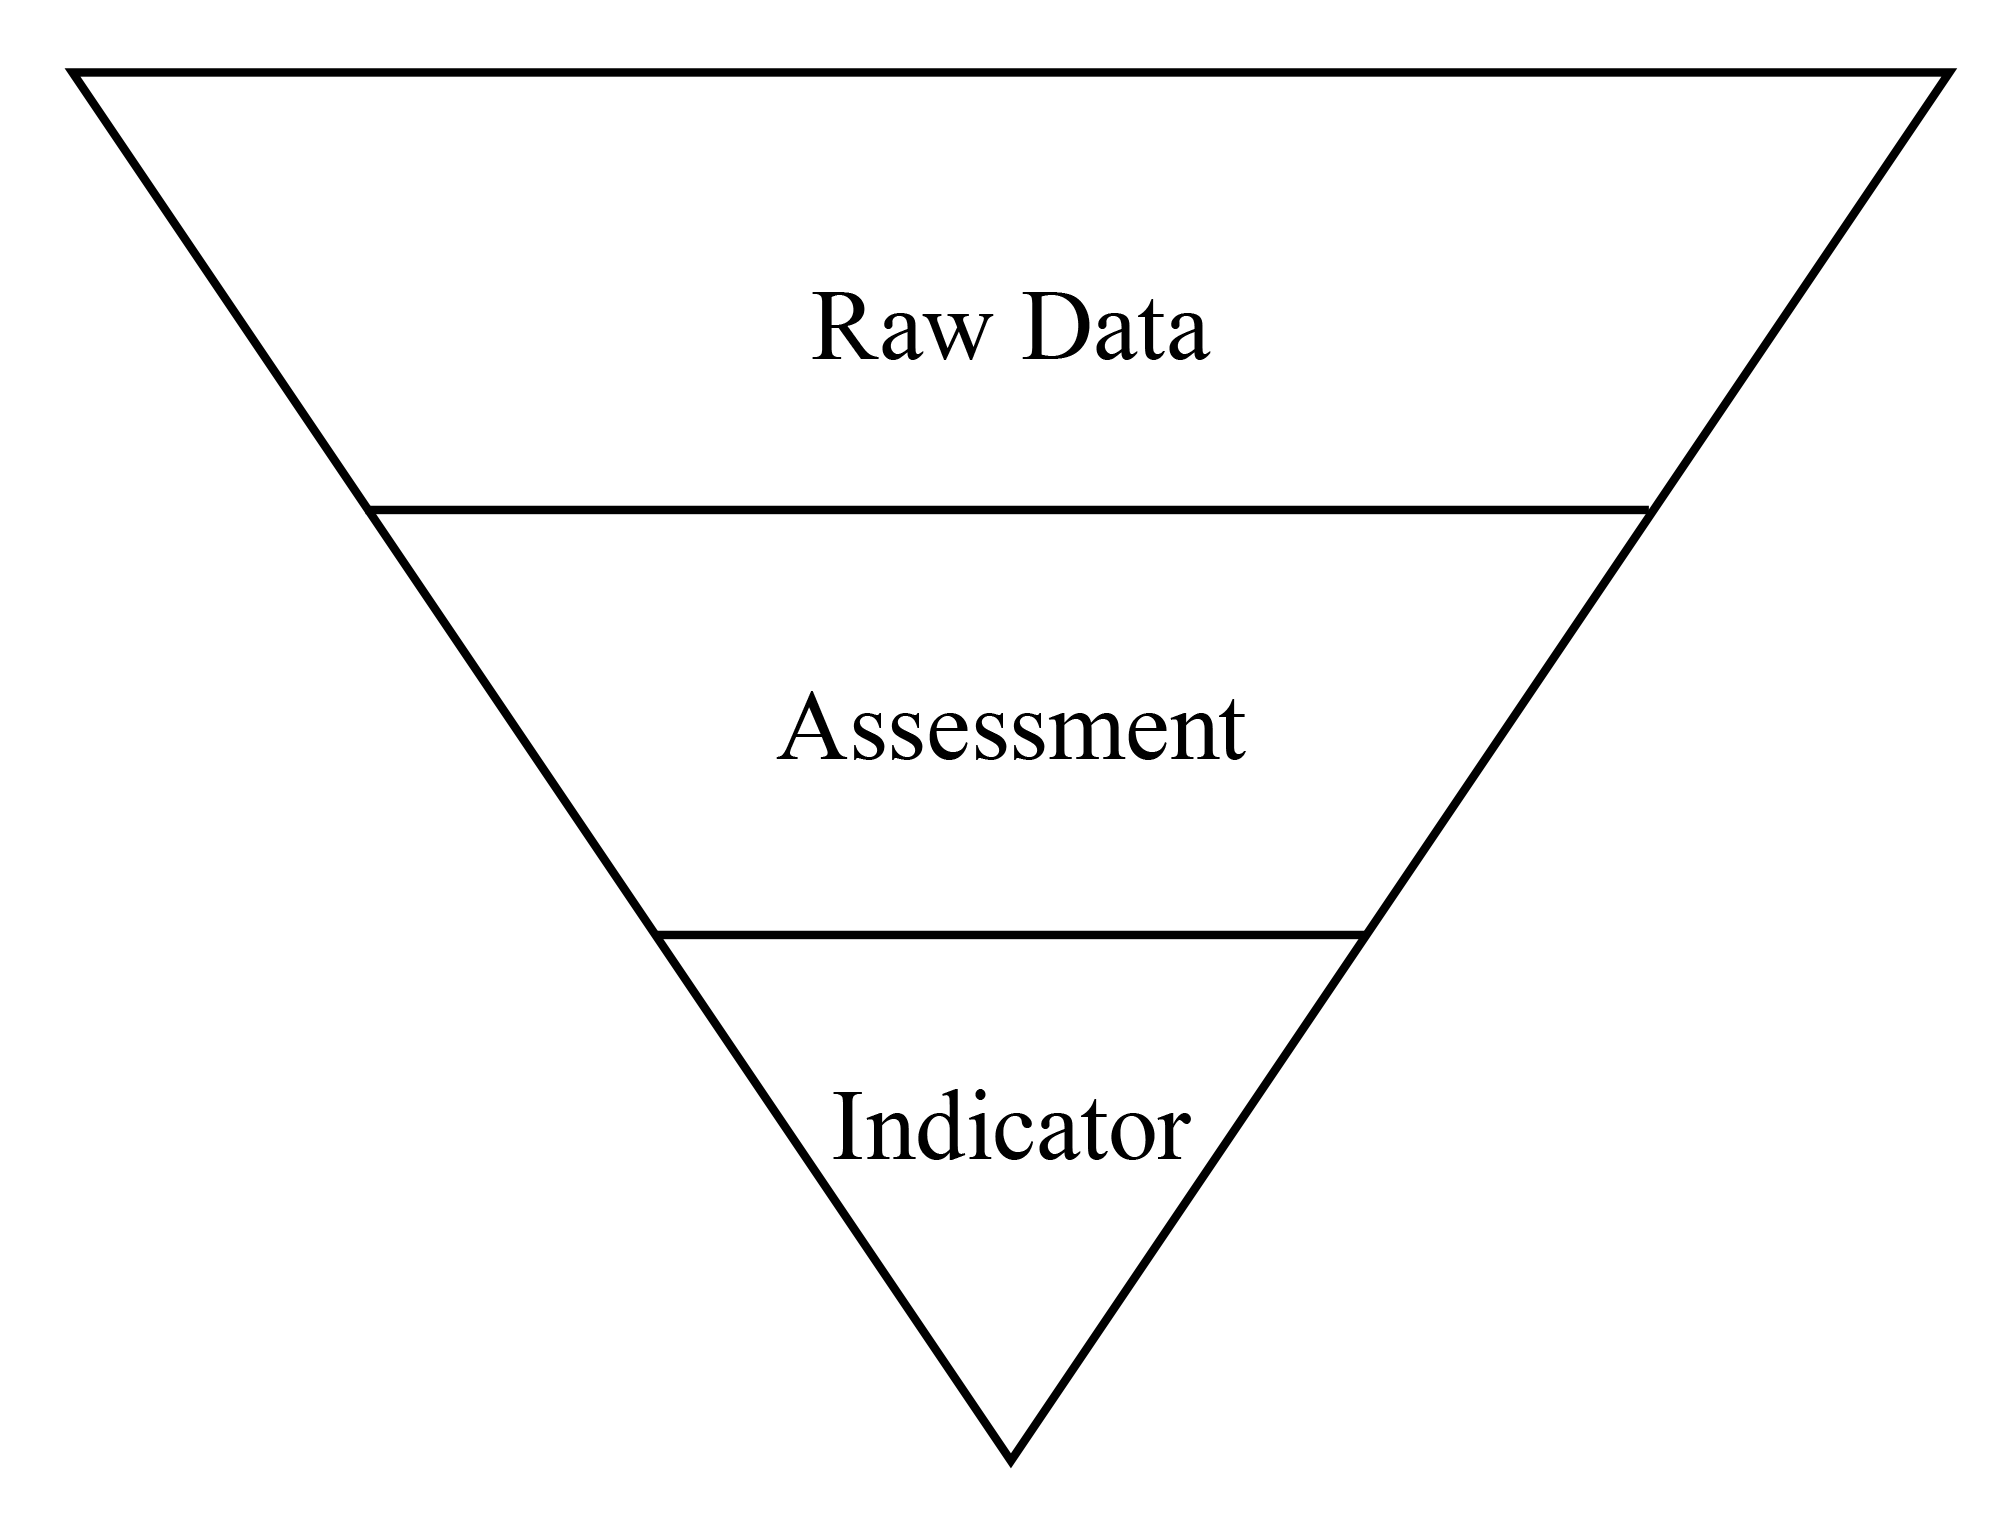 Figure 1. Inverted assessment pyramid.